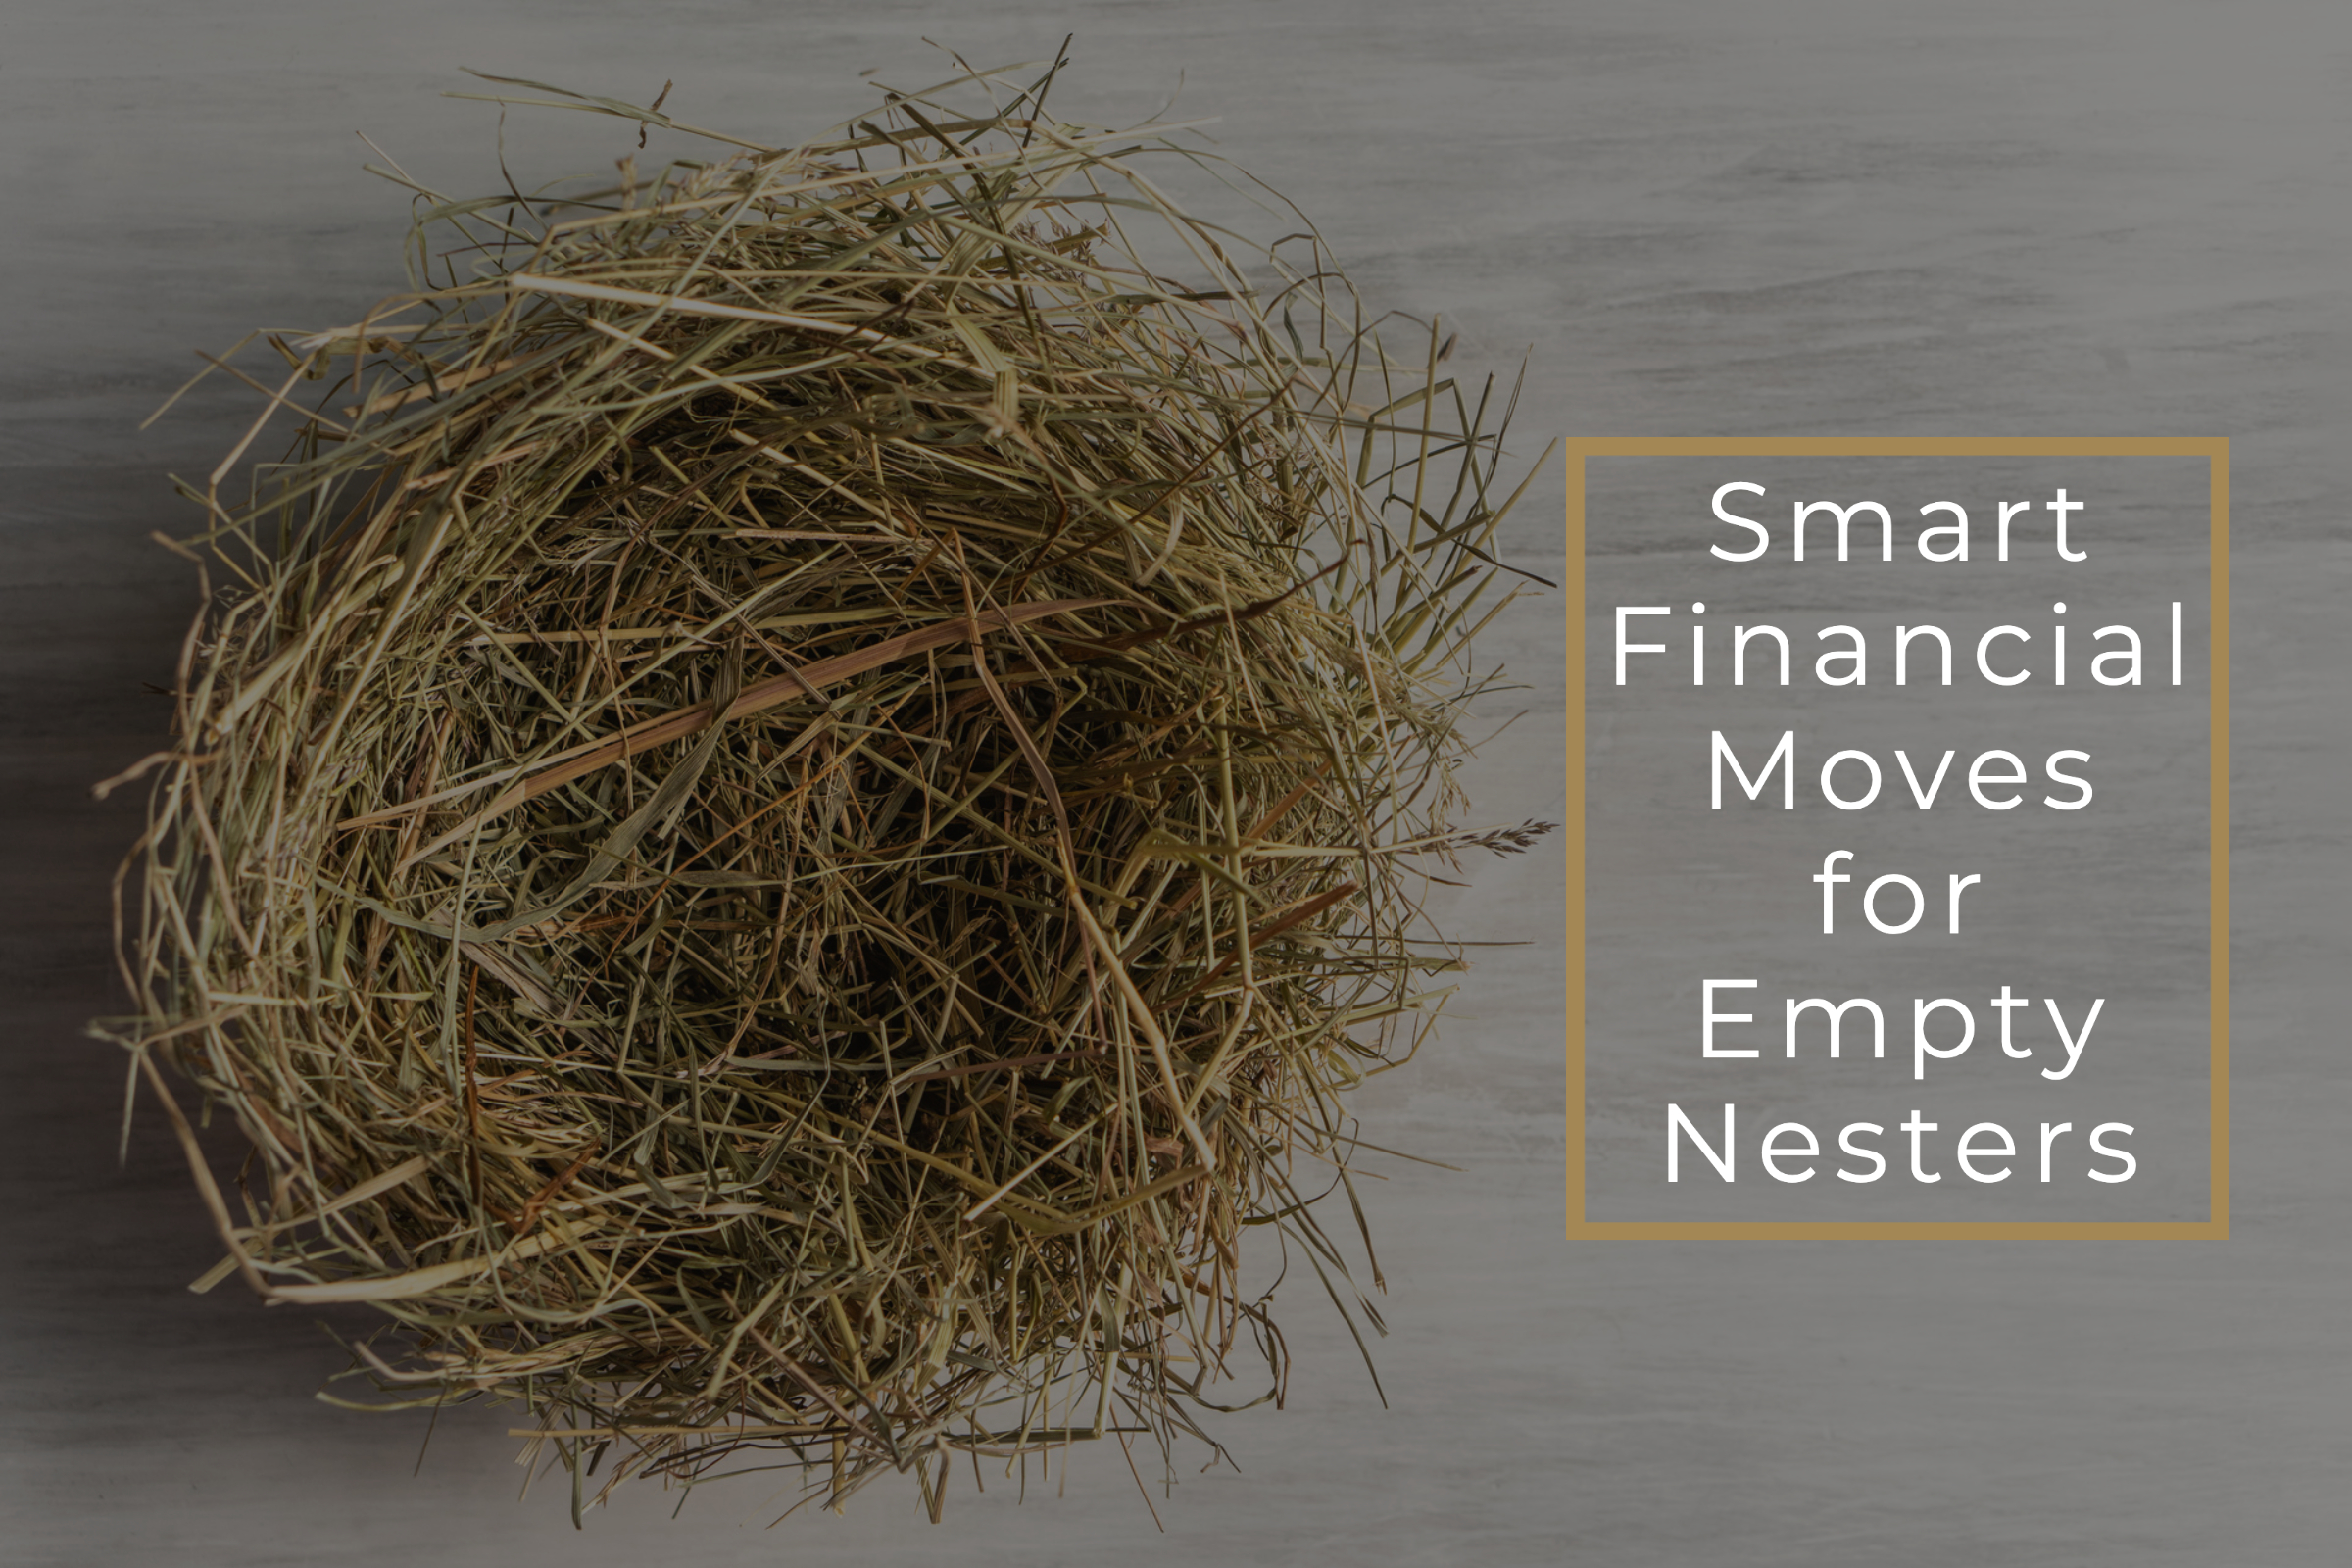 02-2023-EG-A2-FI-03-Smart-Financial-Moves-for-Empty-Nesters-1